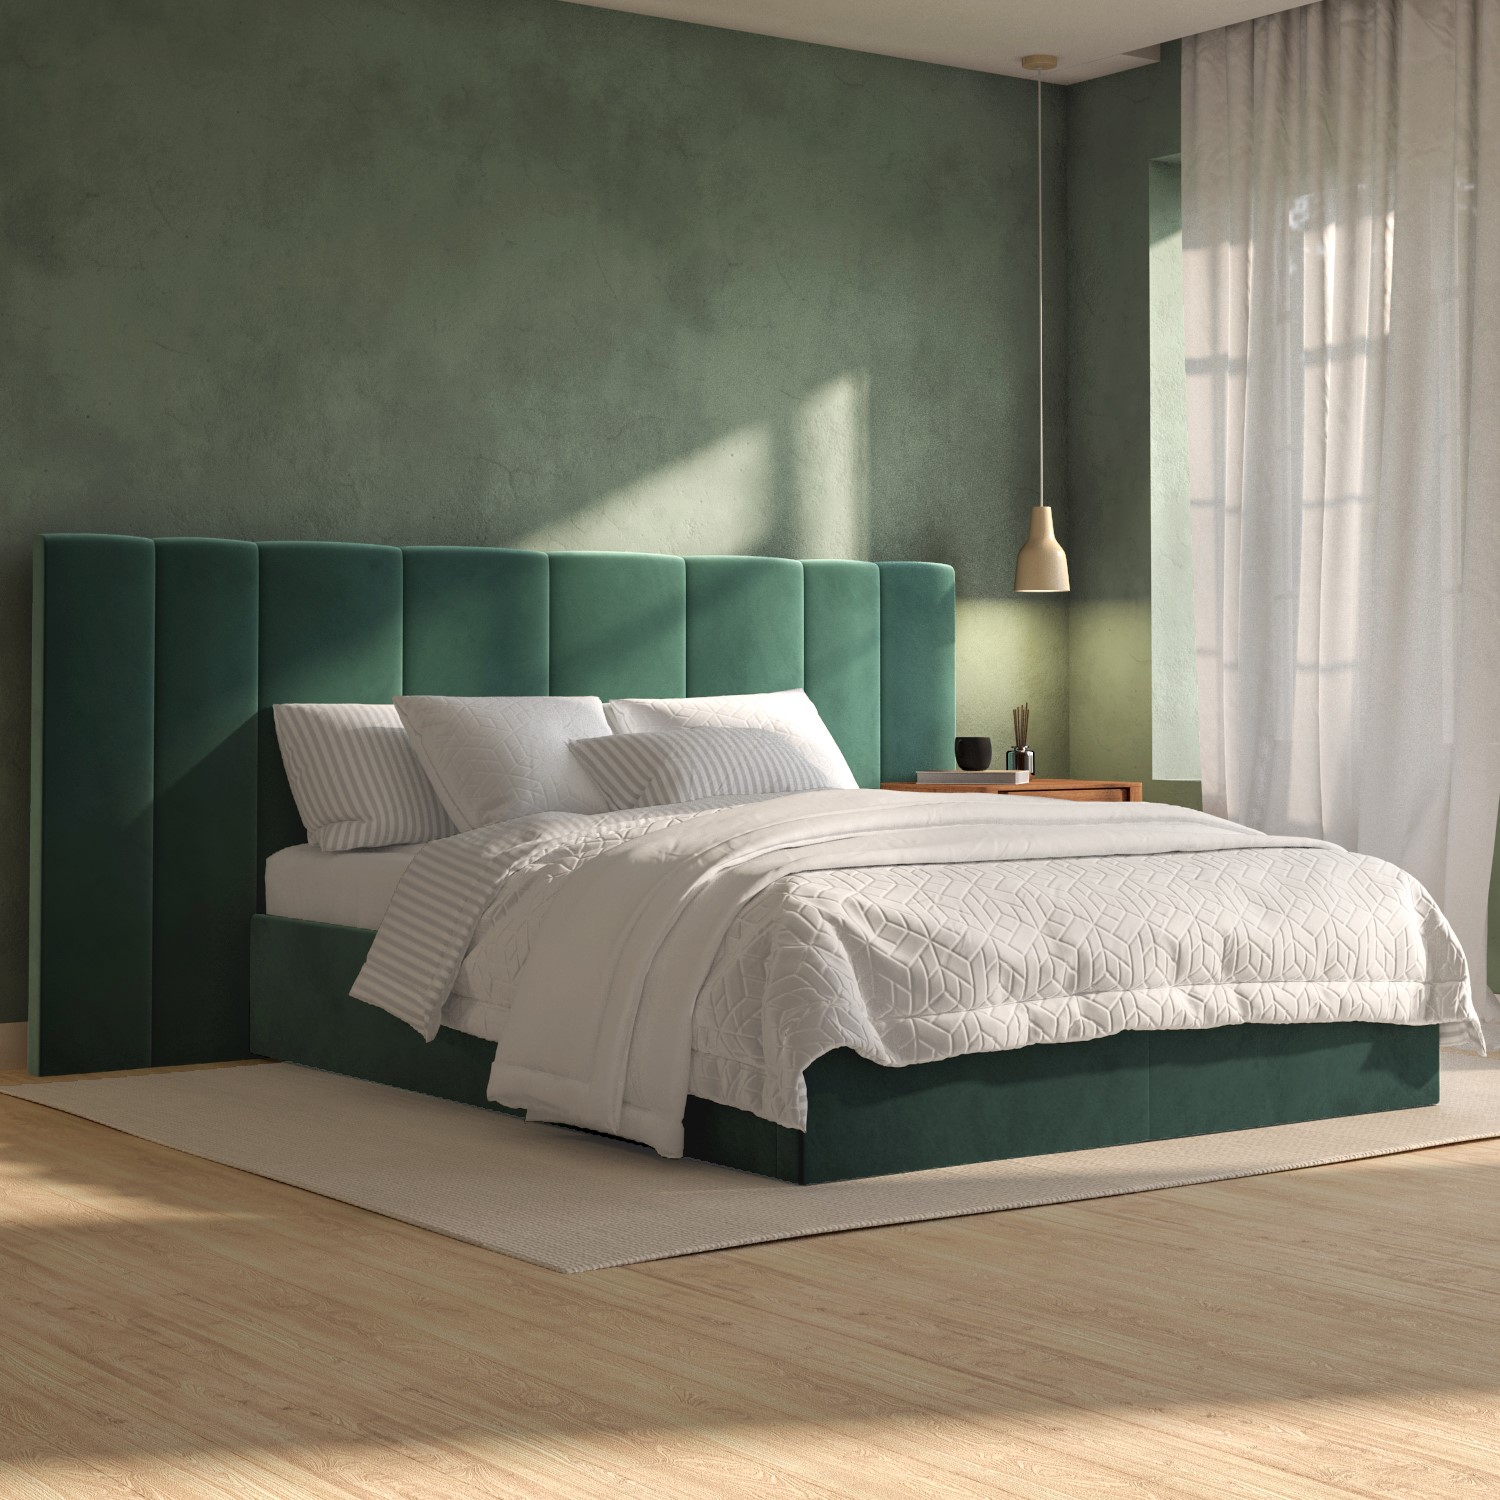 Read more about Green velvet double ottoman bed with wide headboard iman